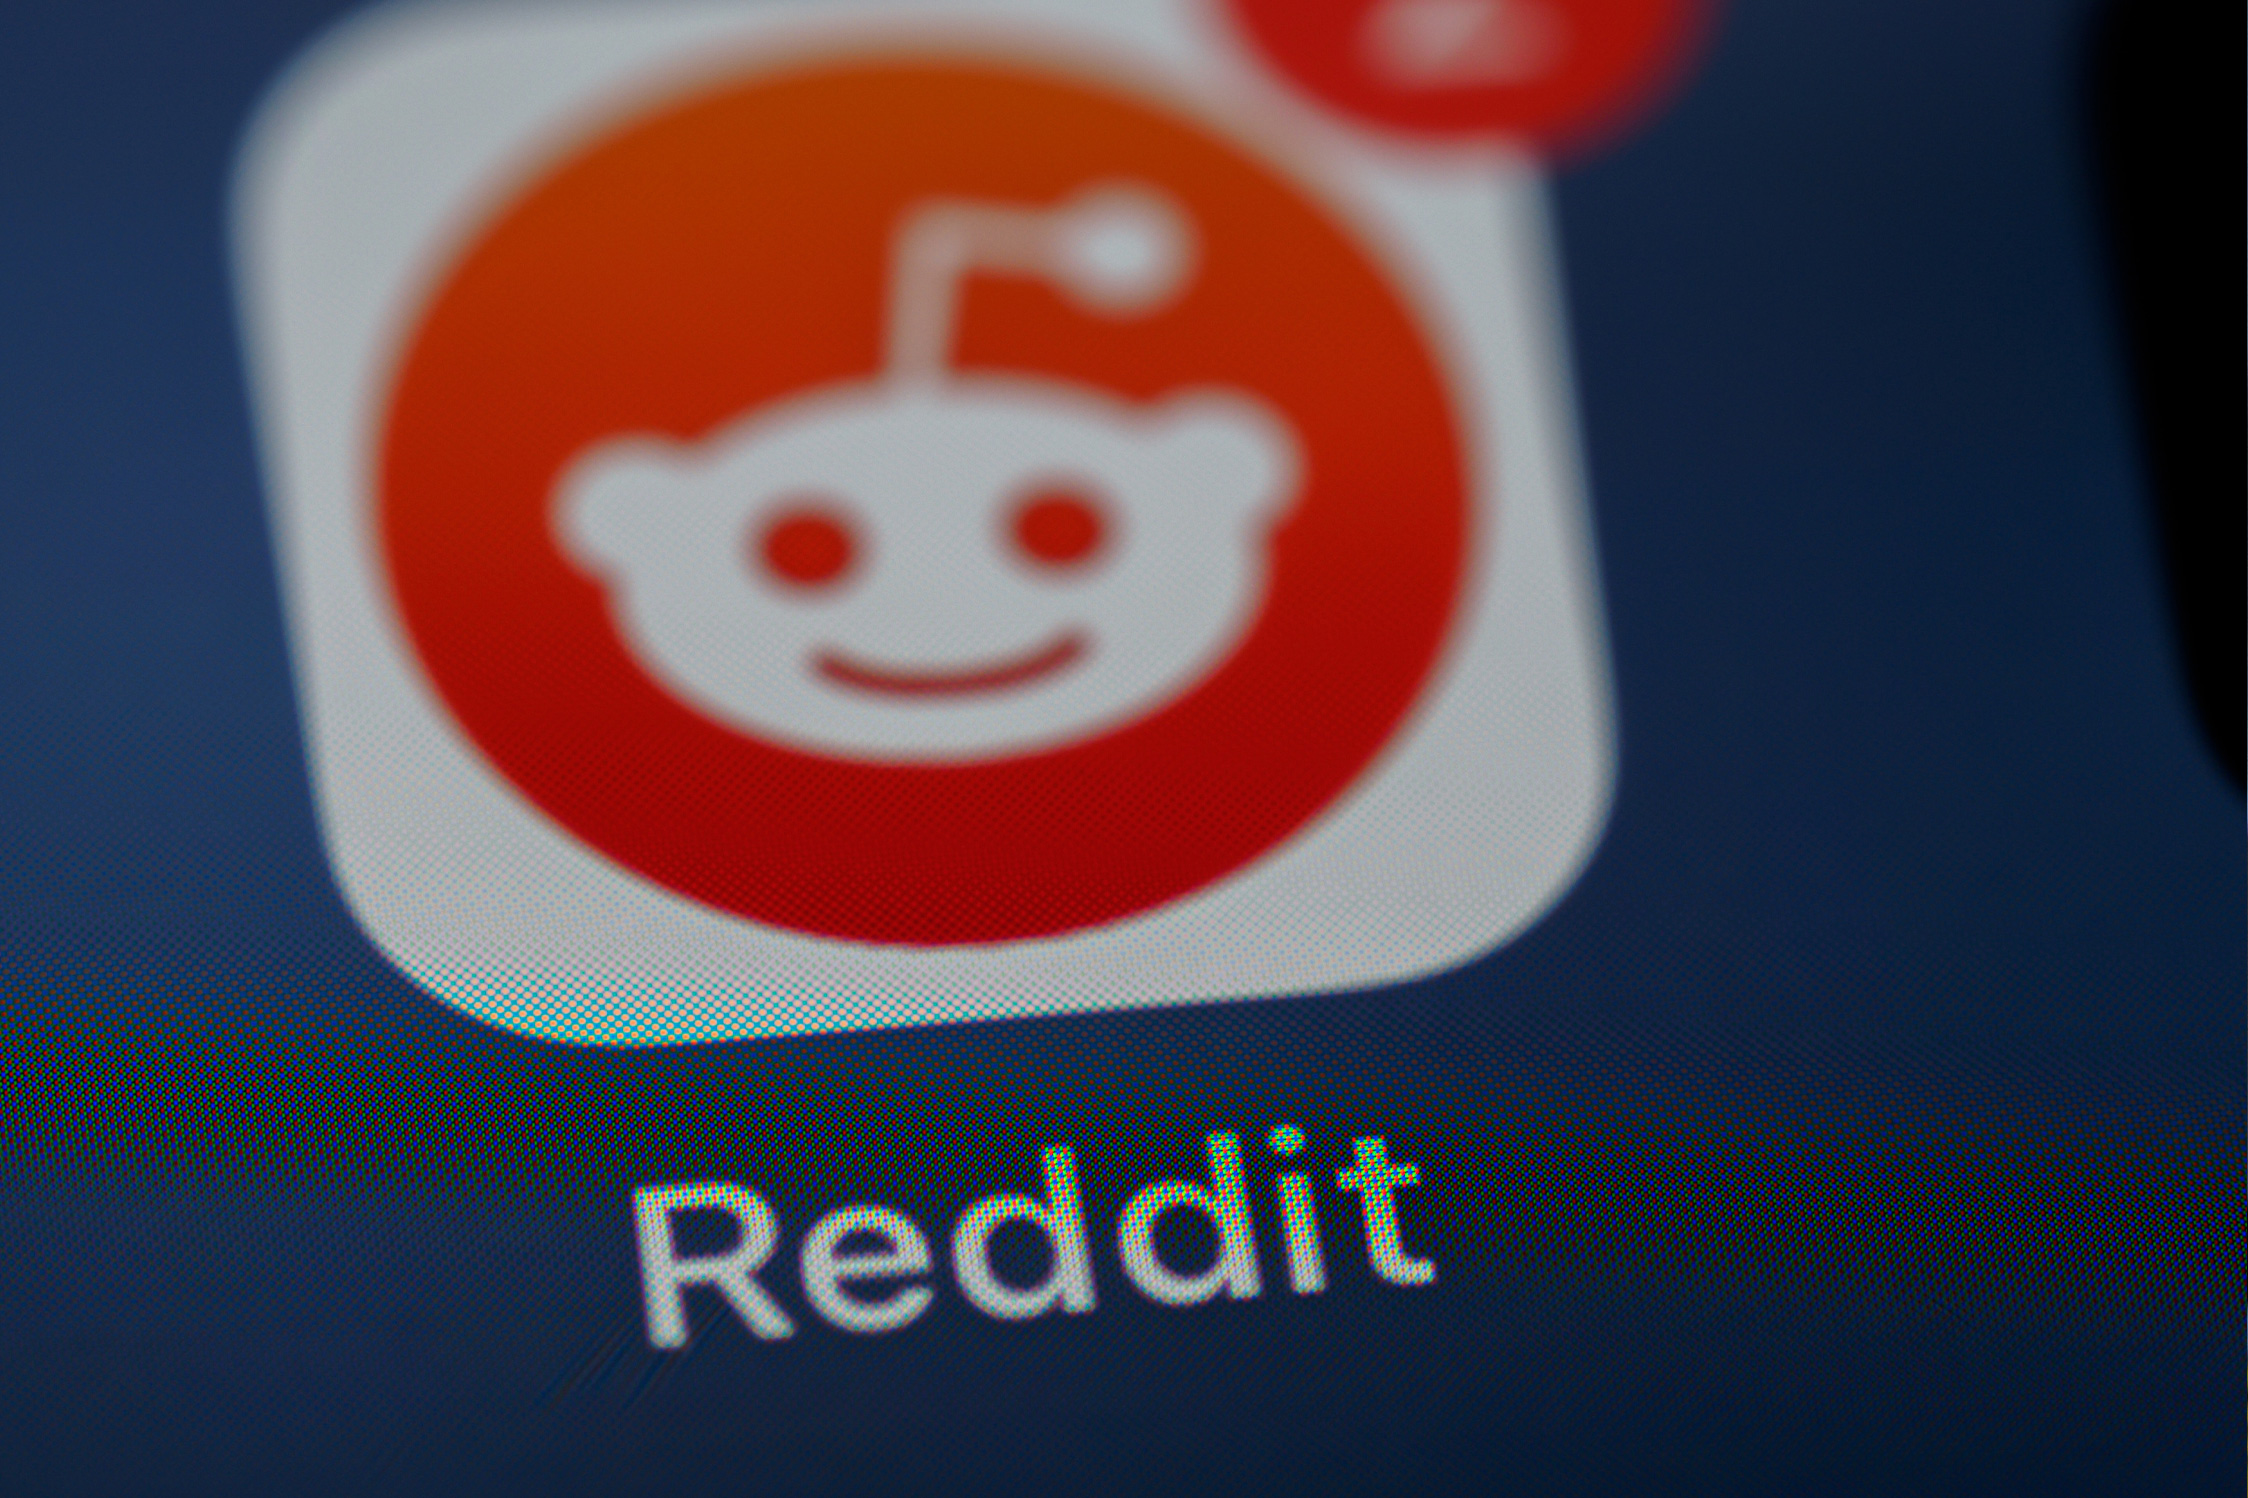 An Anti-Porn Organization Wants to Clean Up Reddit